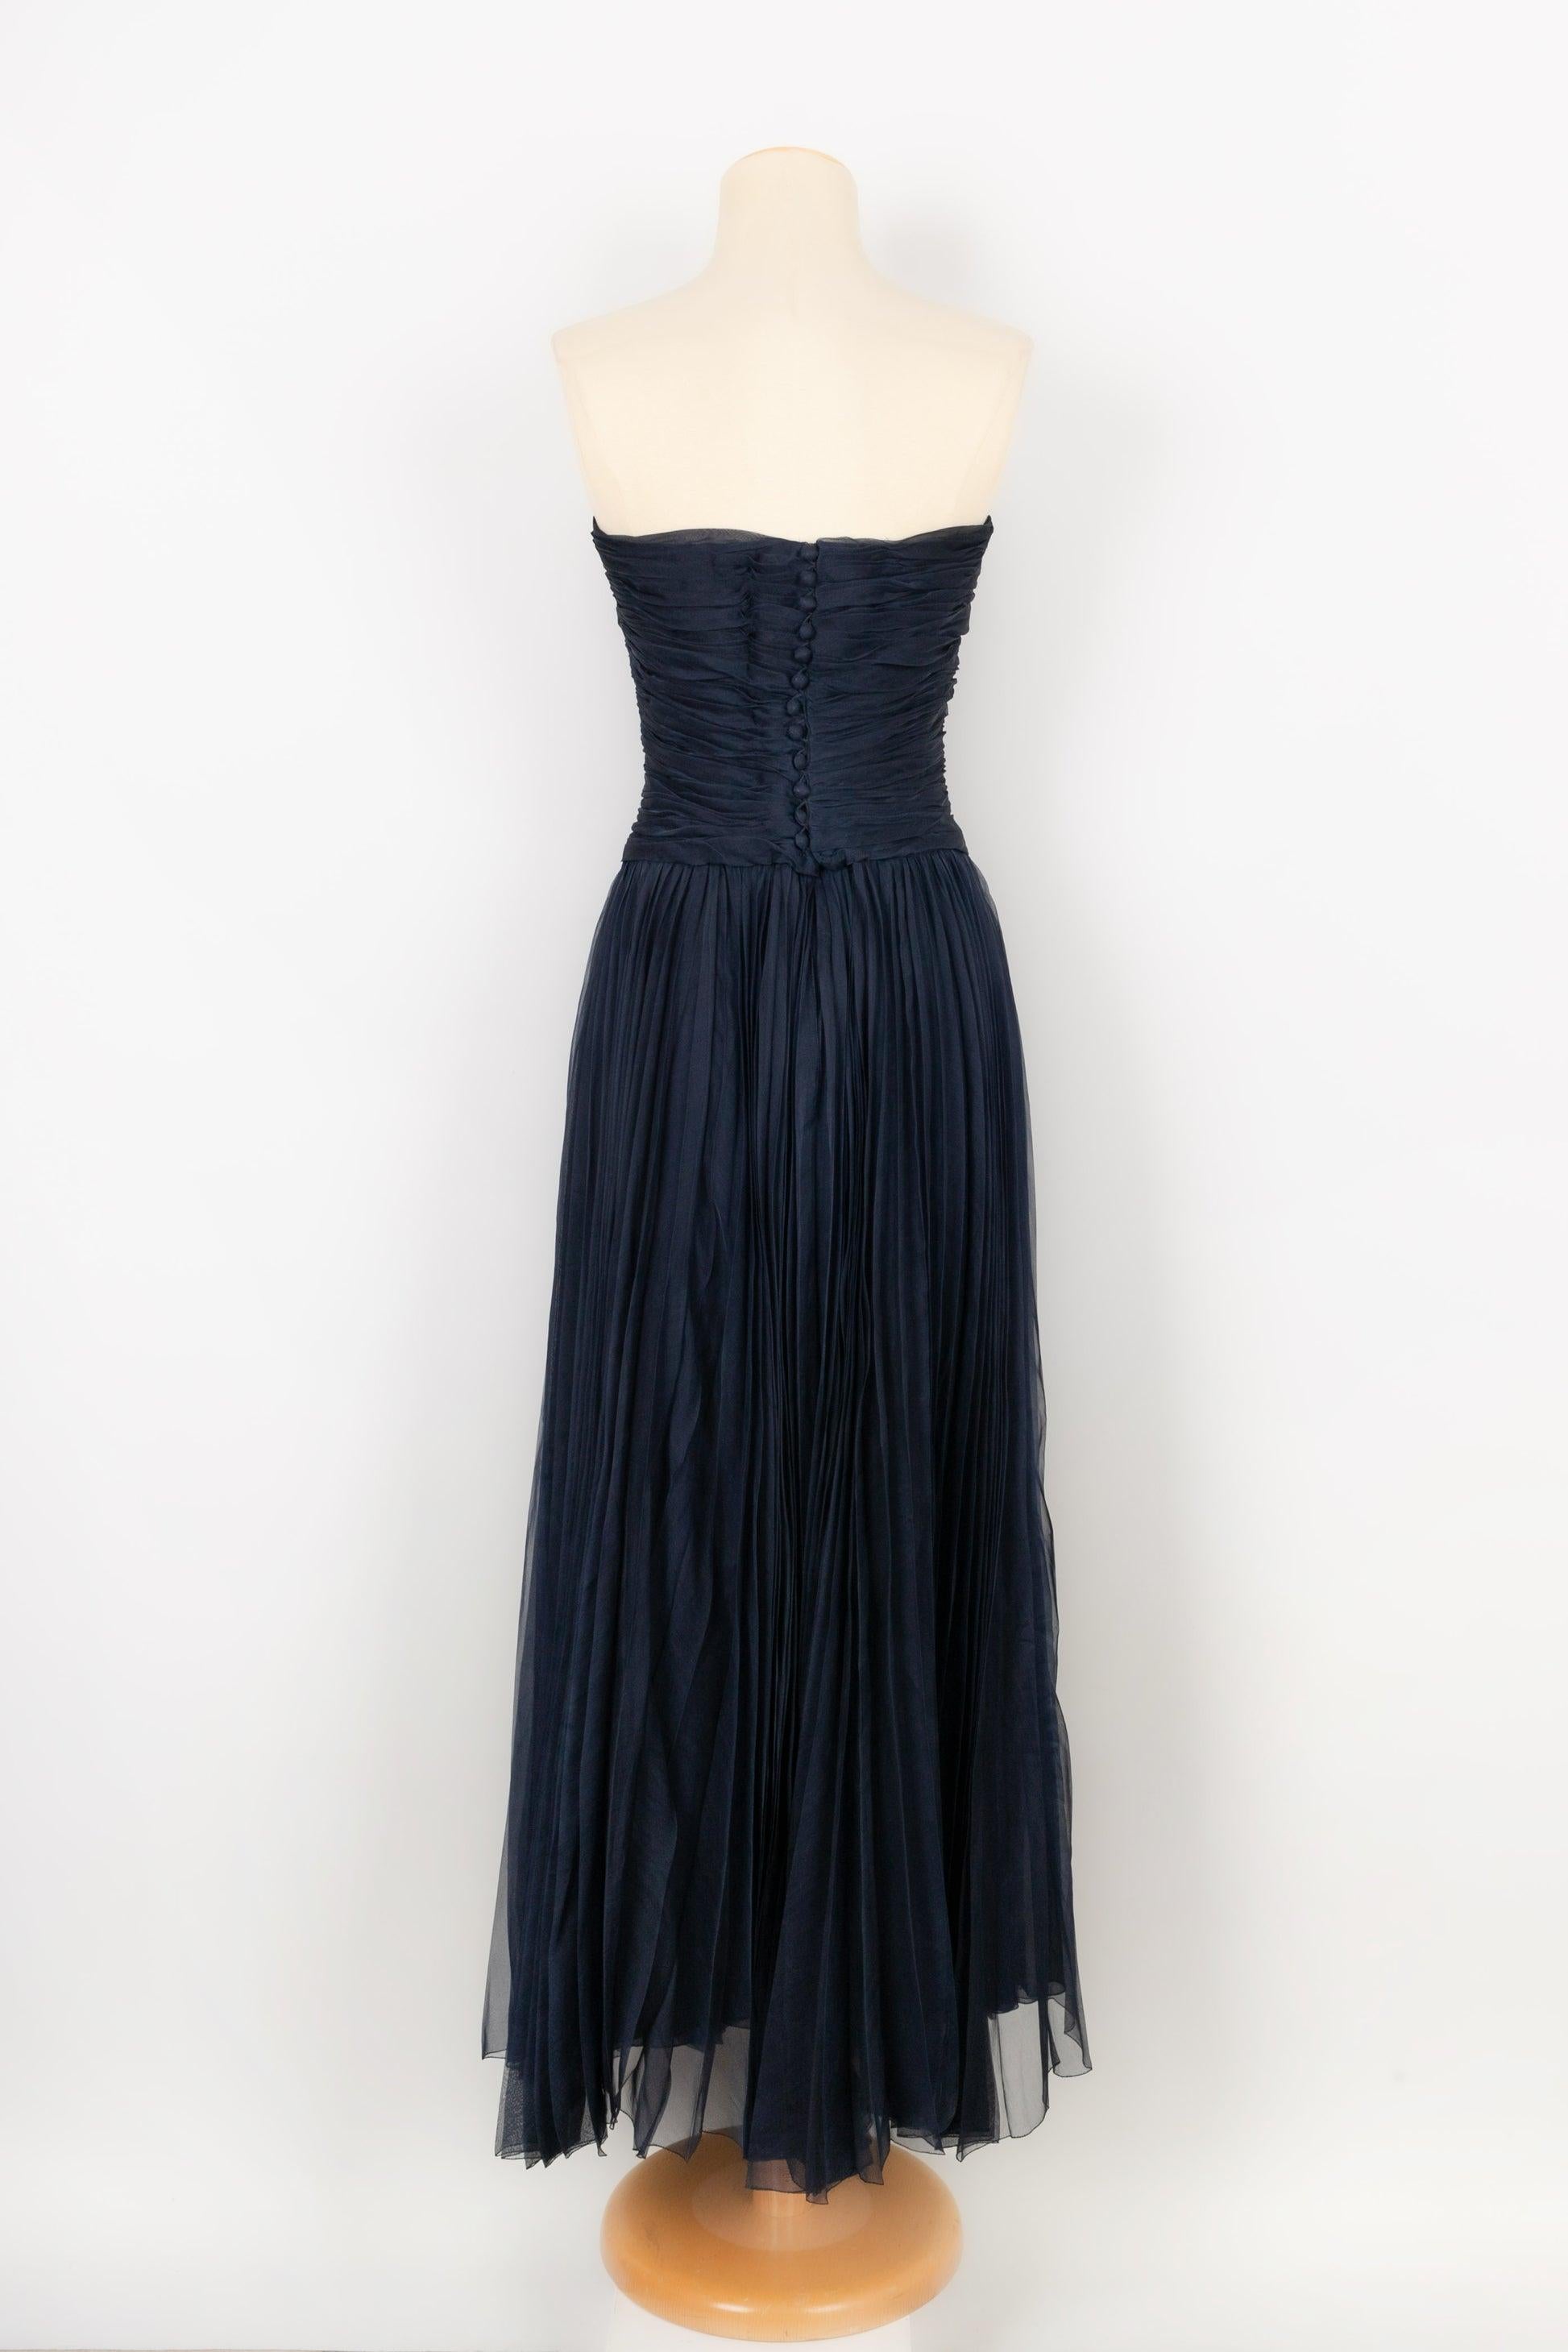 Chanel Long Bustier Dress in Navy Blue Pleated Silk Taffeta In Excellent Condition For Sale In SAINT-OUEN-SUR-SEINE, FR